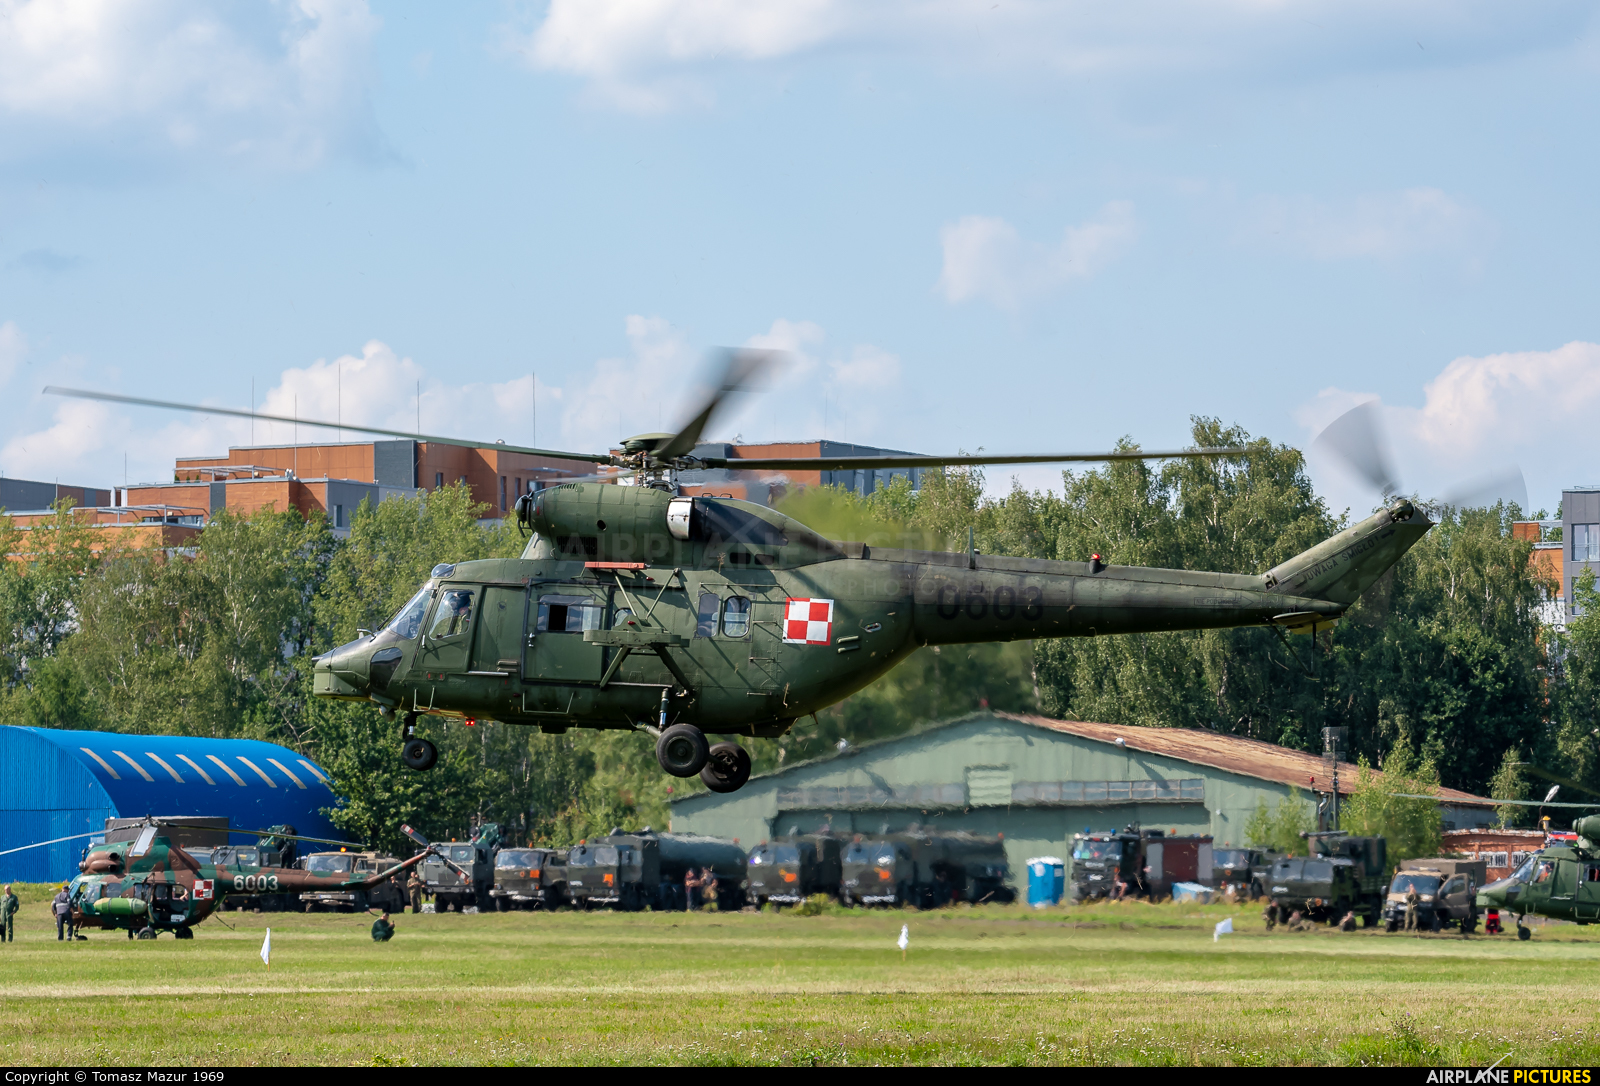 Poland - Army 0603 aircraft at Katowice Muchowiec